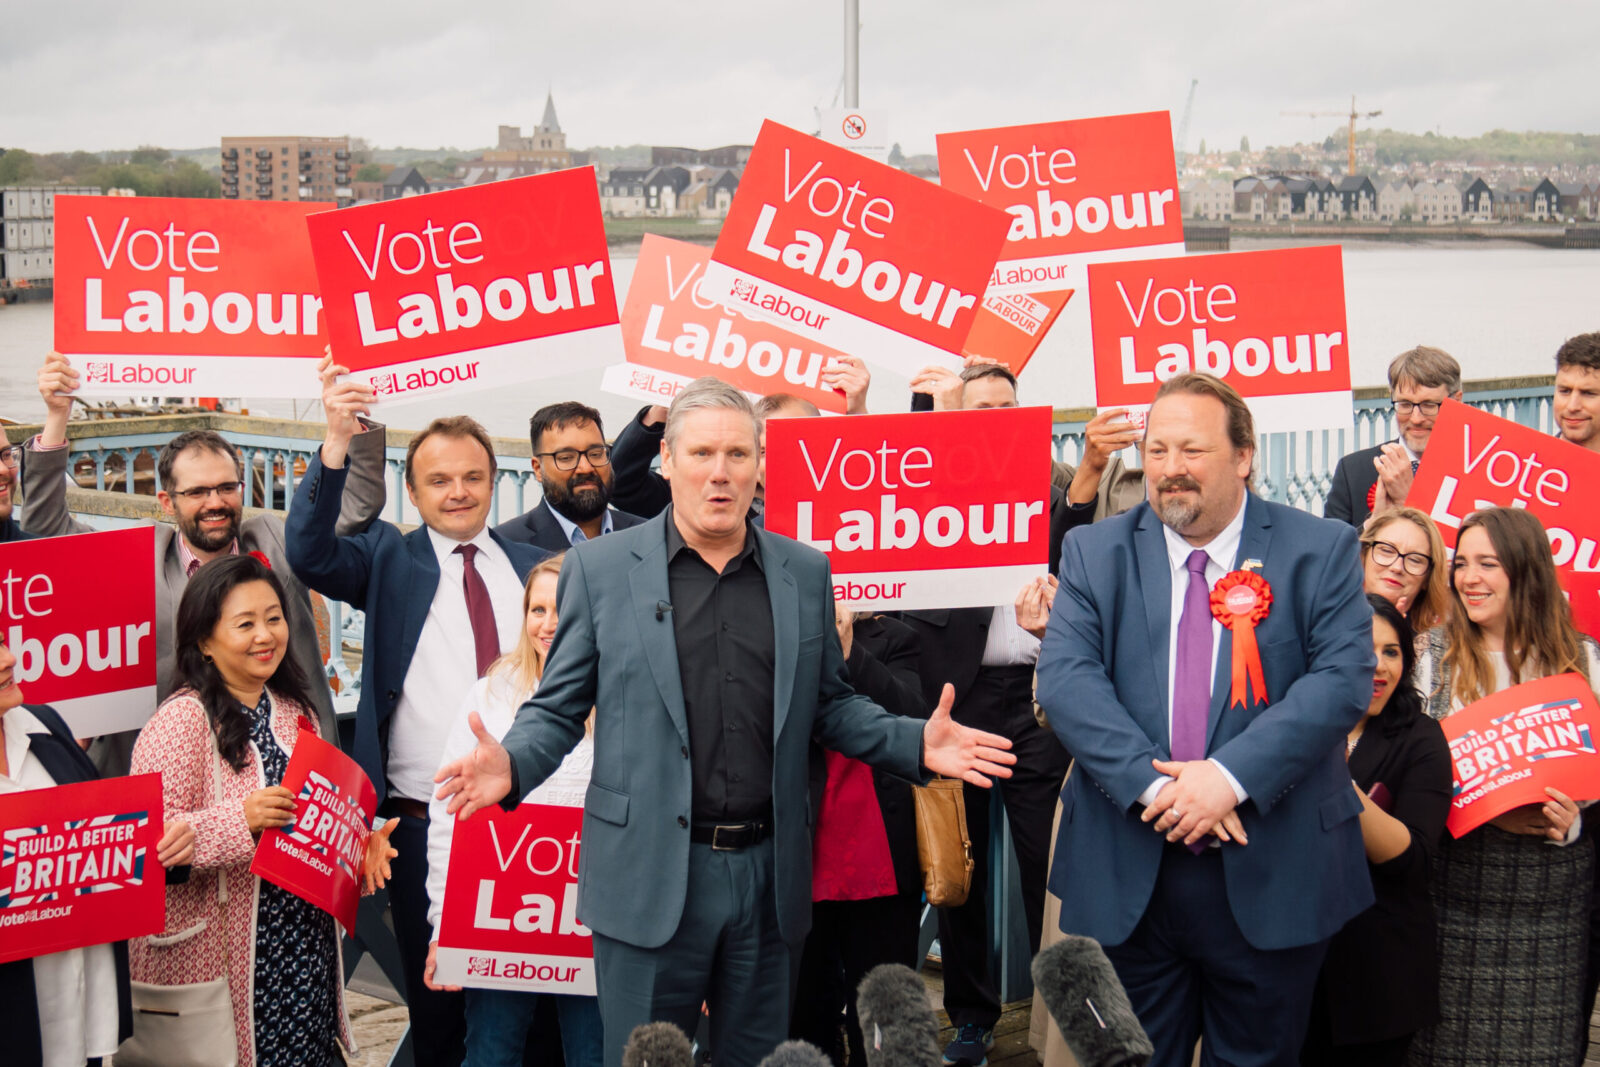 Medway Labour and Keir Starmer